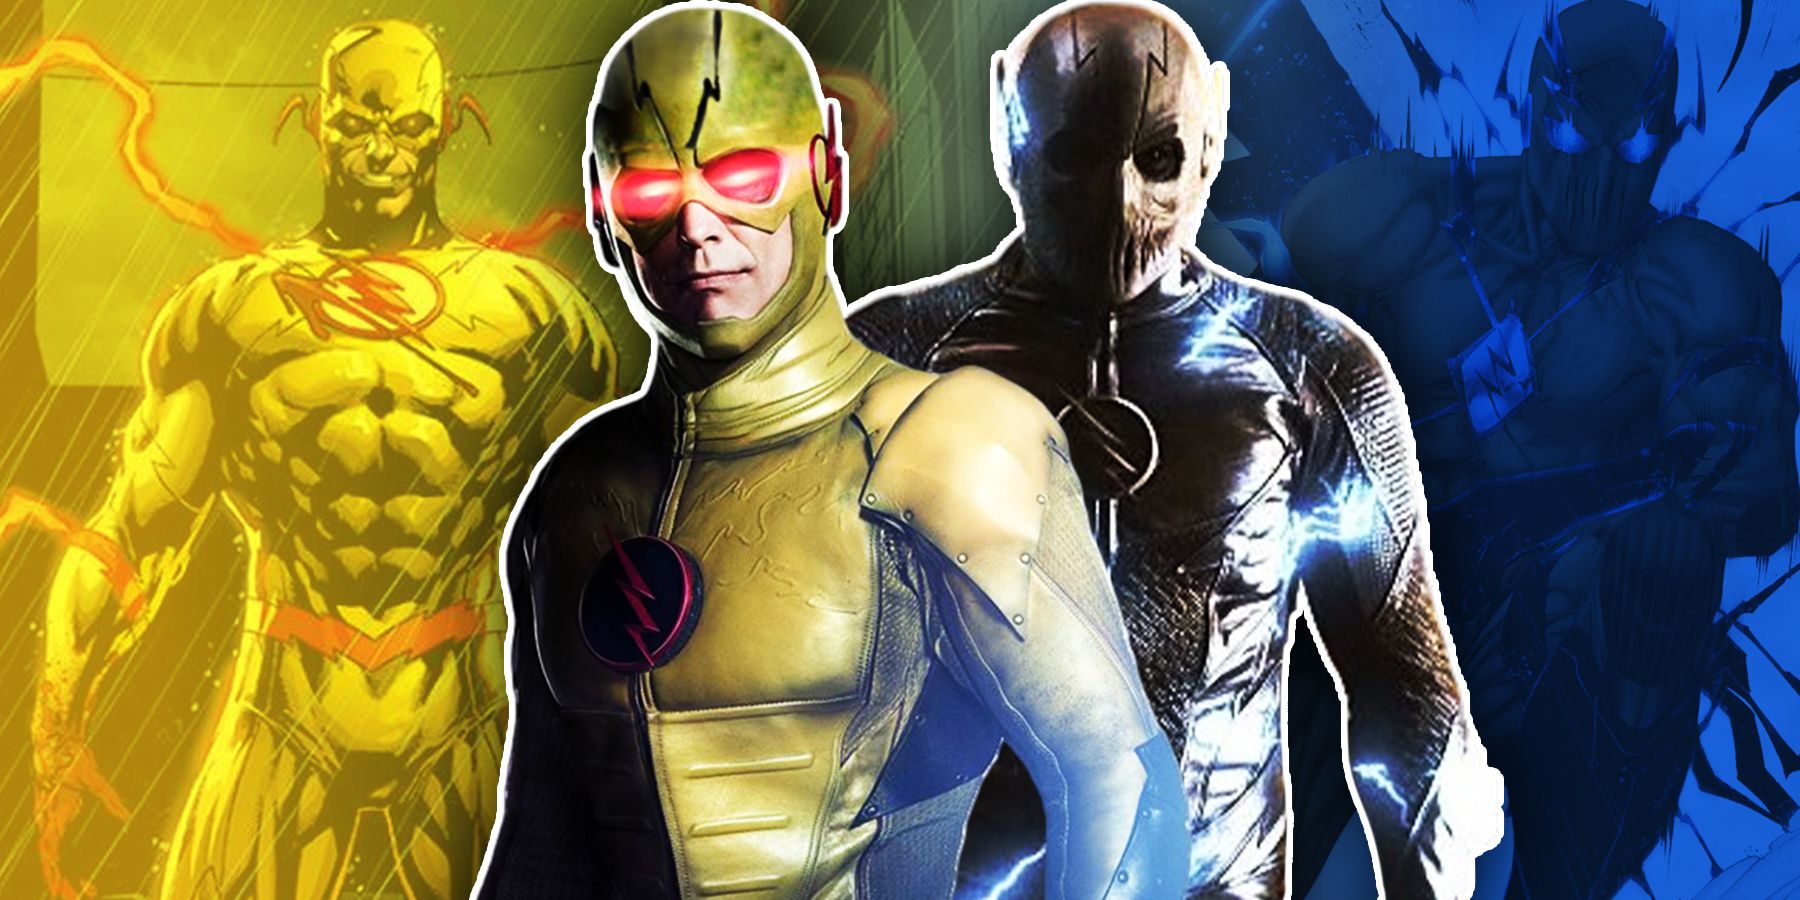 Reverse-Flash and Zoom as seen in tv show The Flash and DC Comics